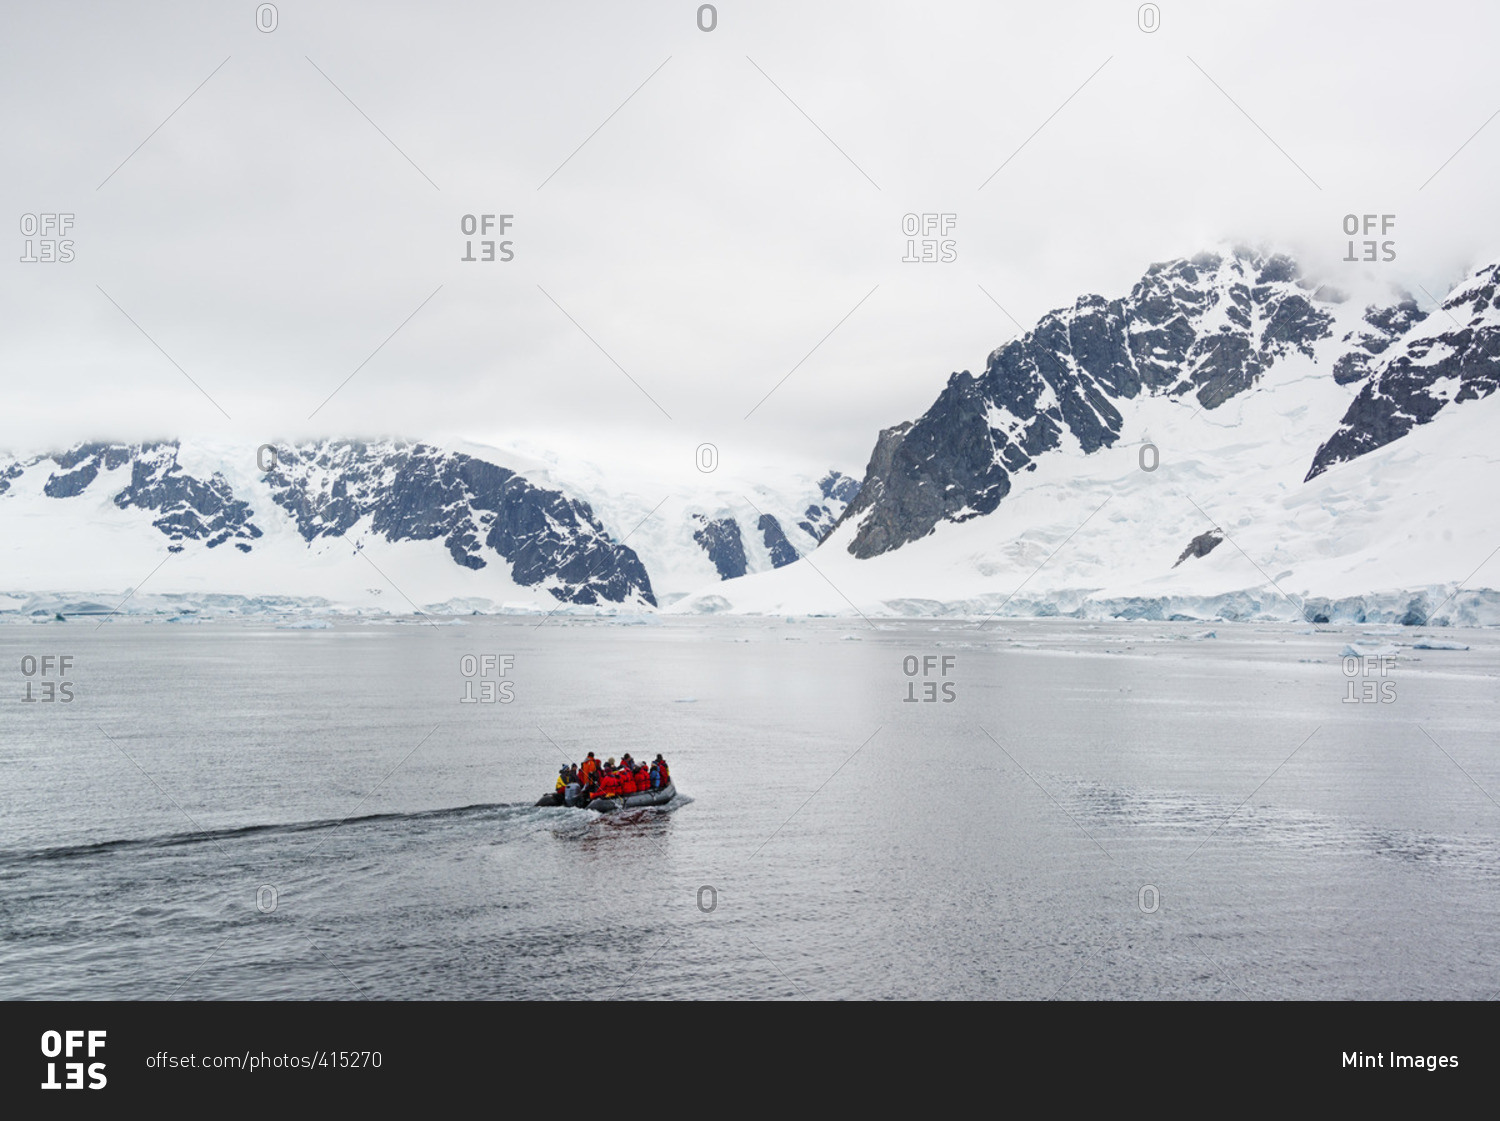 Group of people crossing the ocean in the Antarctic in a rubber boat, snow-covered mountains in the background